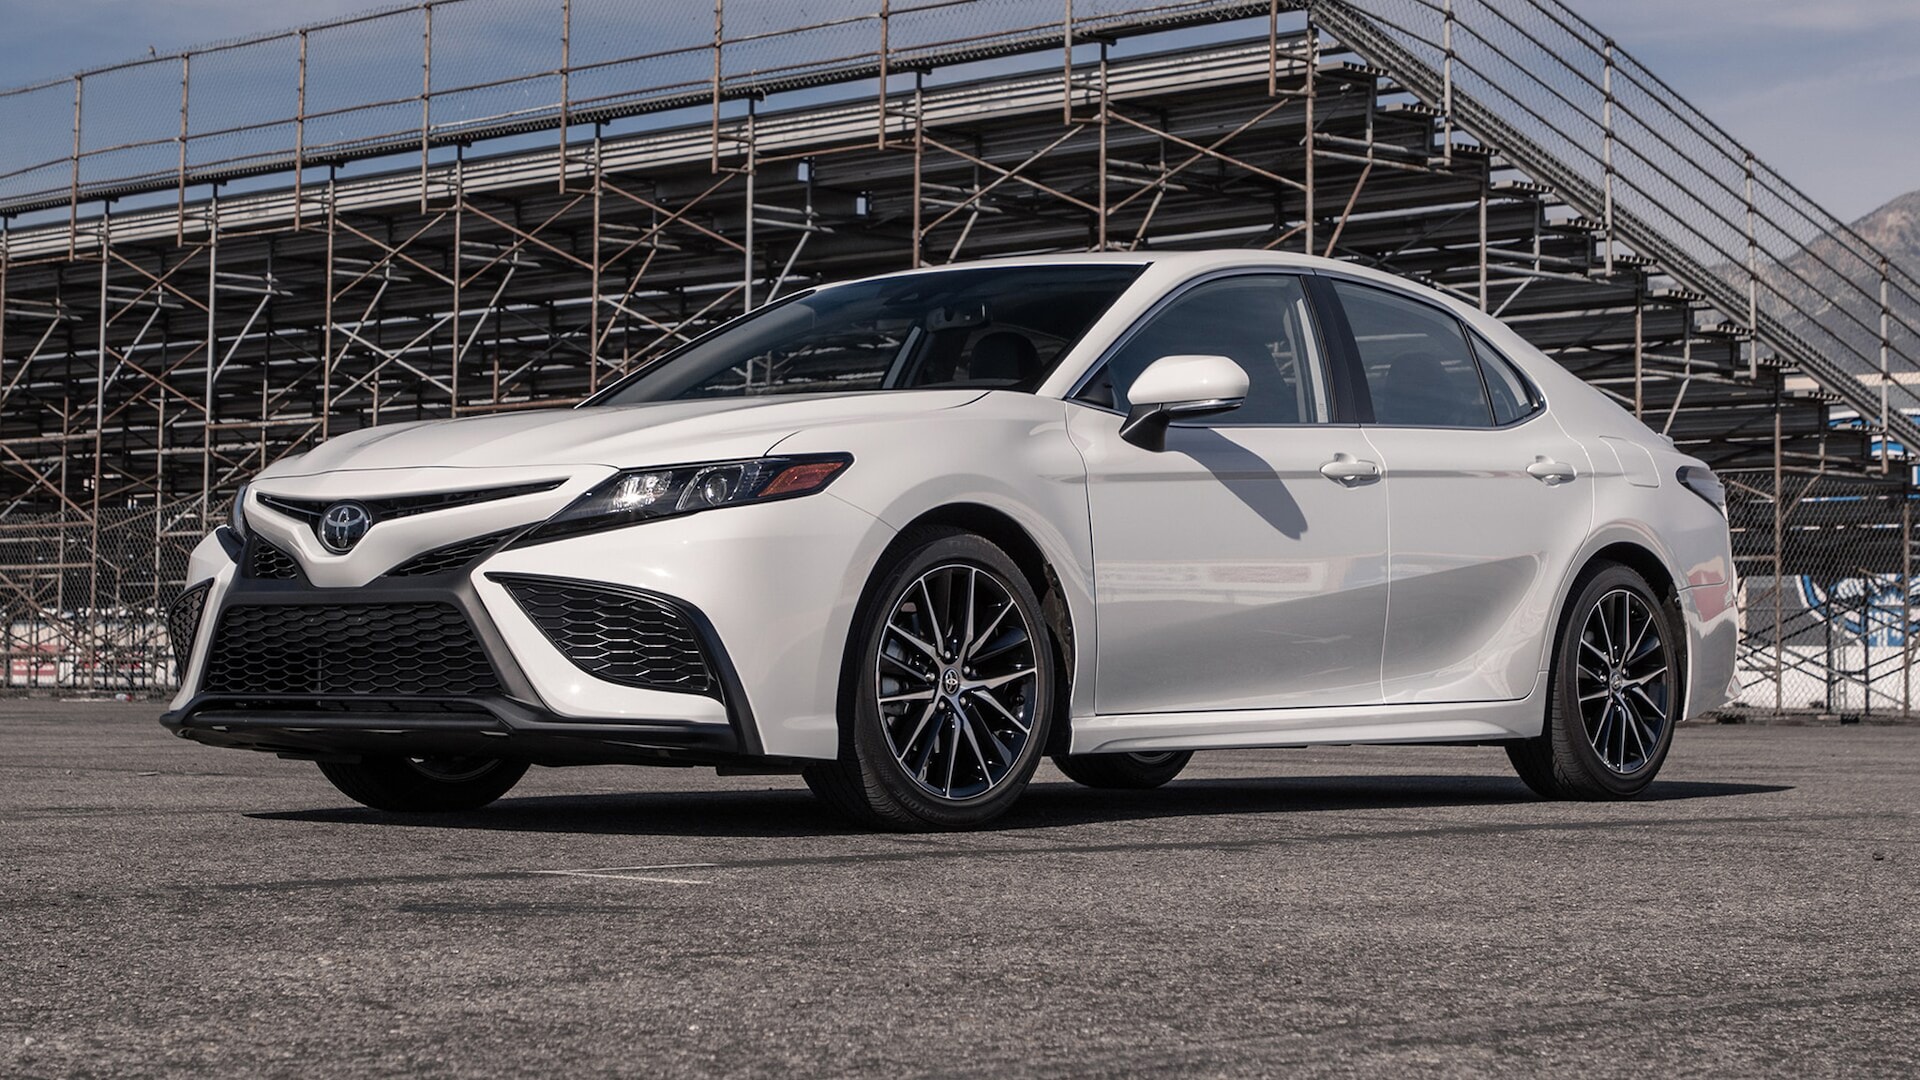 2022 Toyota Camry Prices, Reviews, and Photos - MotorTrend